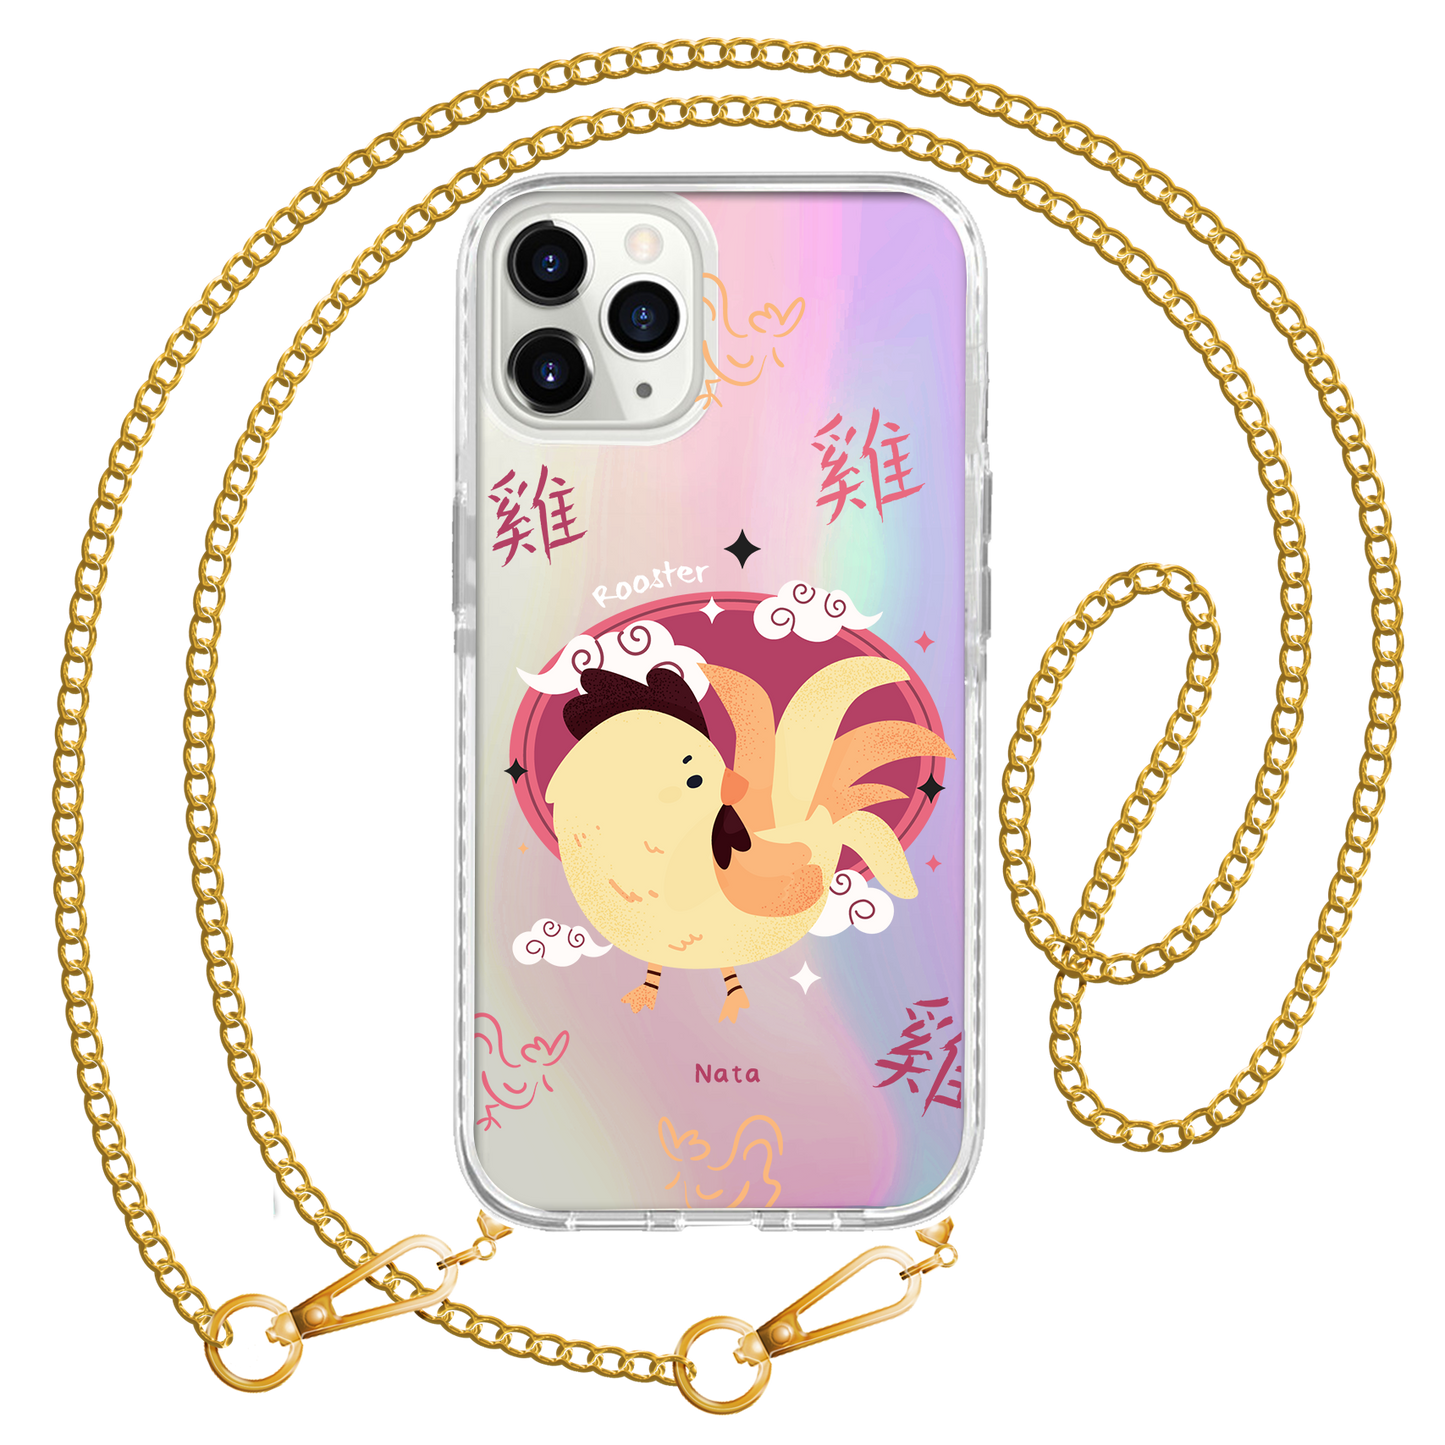 iPhone Rearguard Holo - Rooster (Chinese Zodiac / Shio)